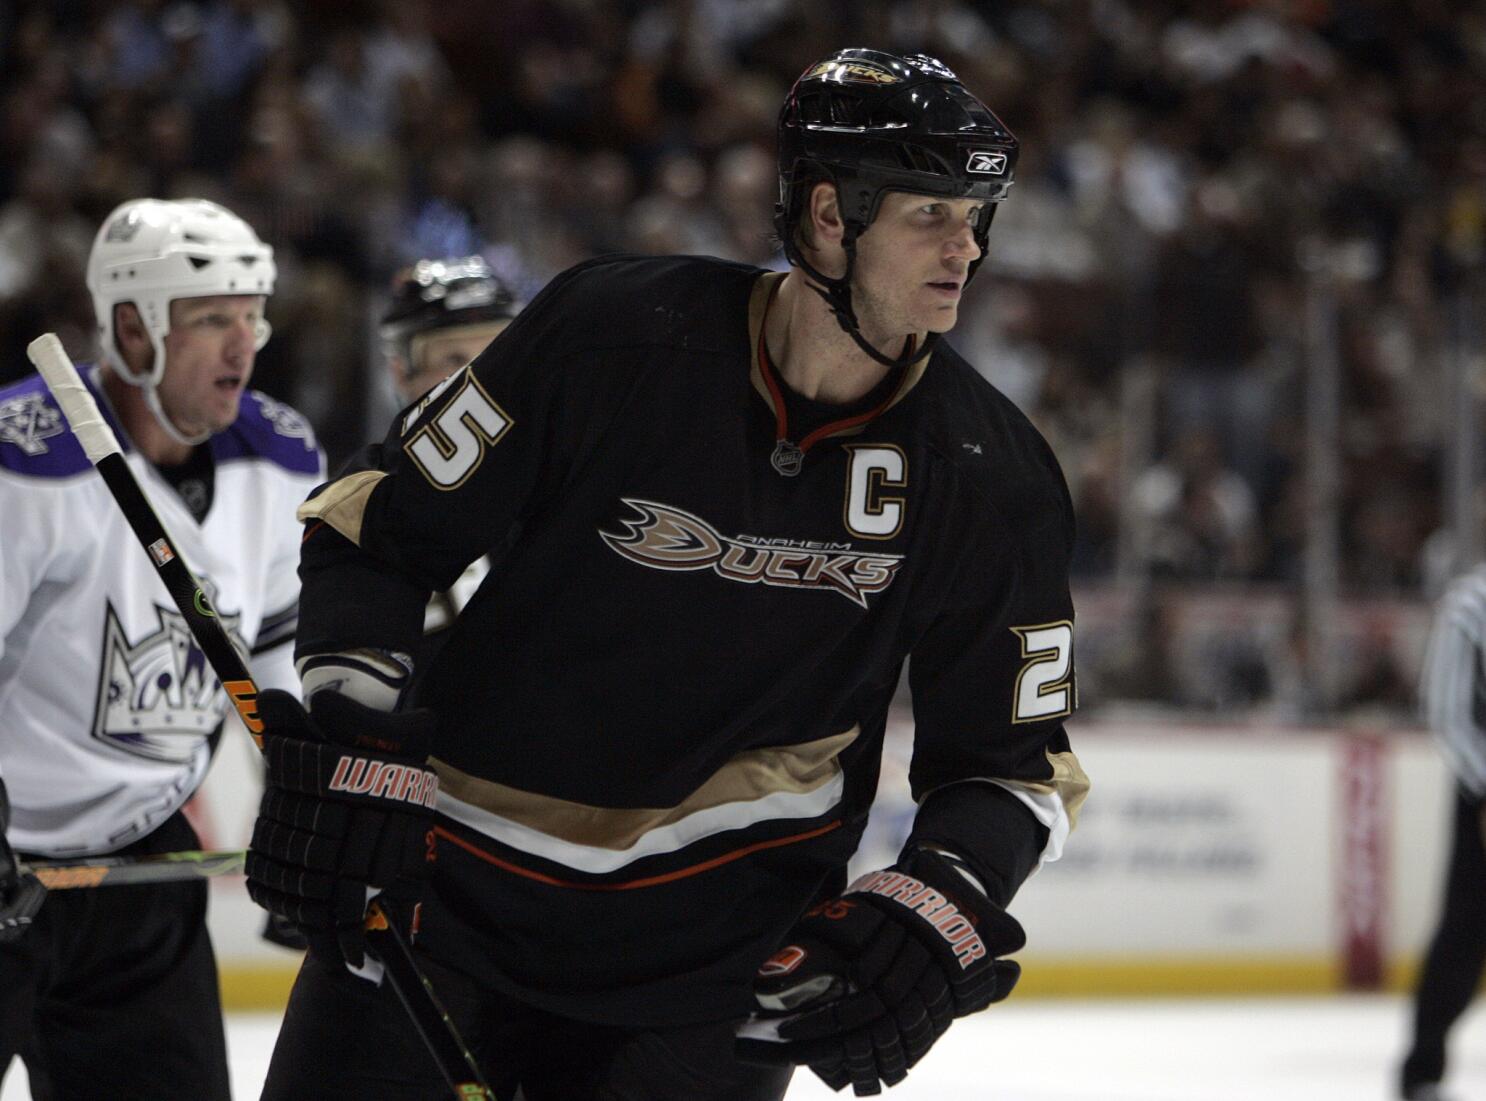 Chris Pronger will hit  with stolen Stanley Cup Finals puck